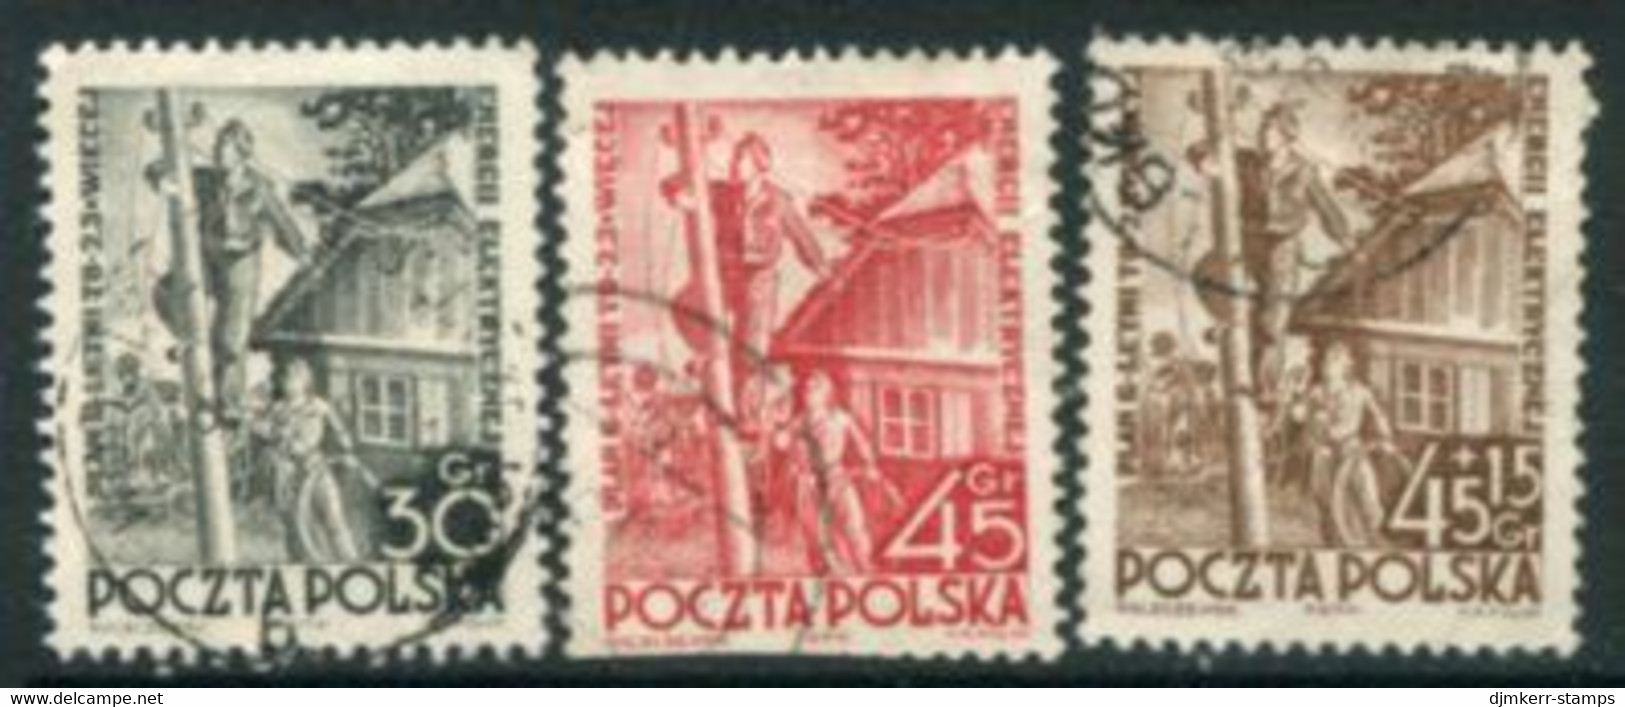 POLAND 1951 Electrical Industries Used.  Michel 719-20, 747 - Gebraucht